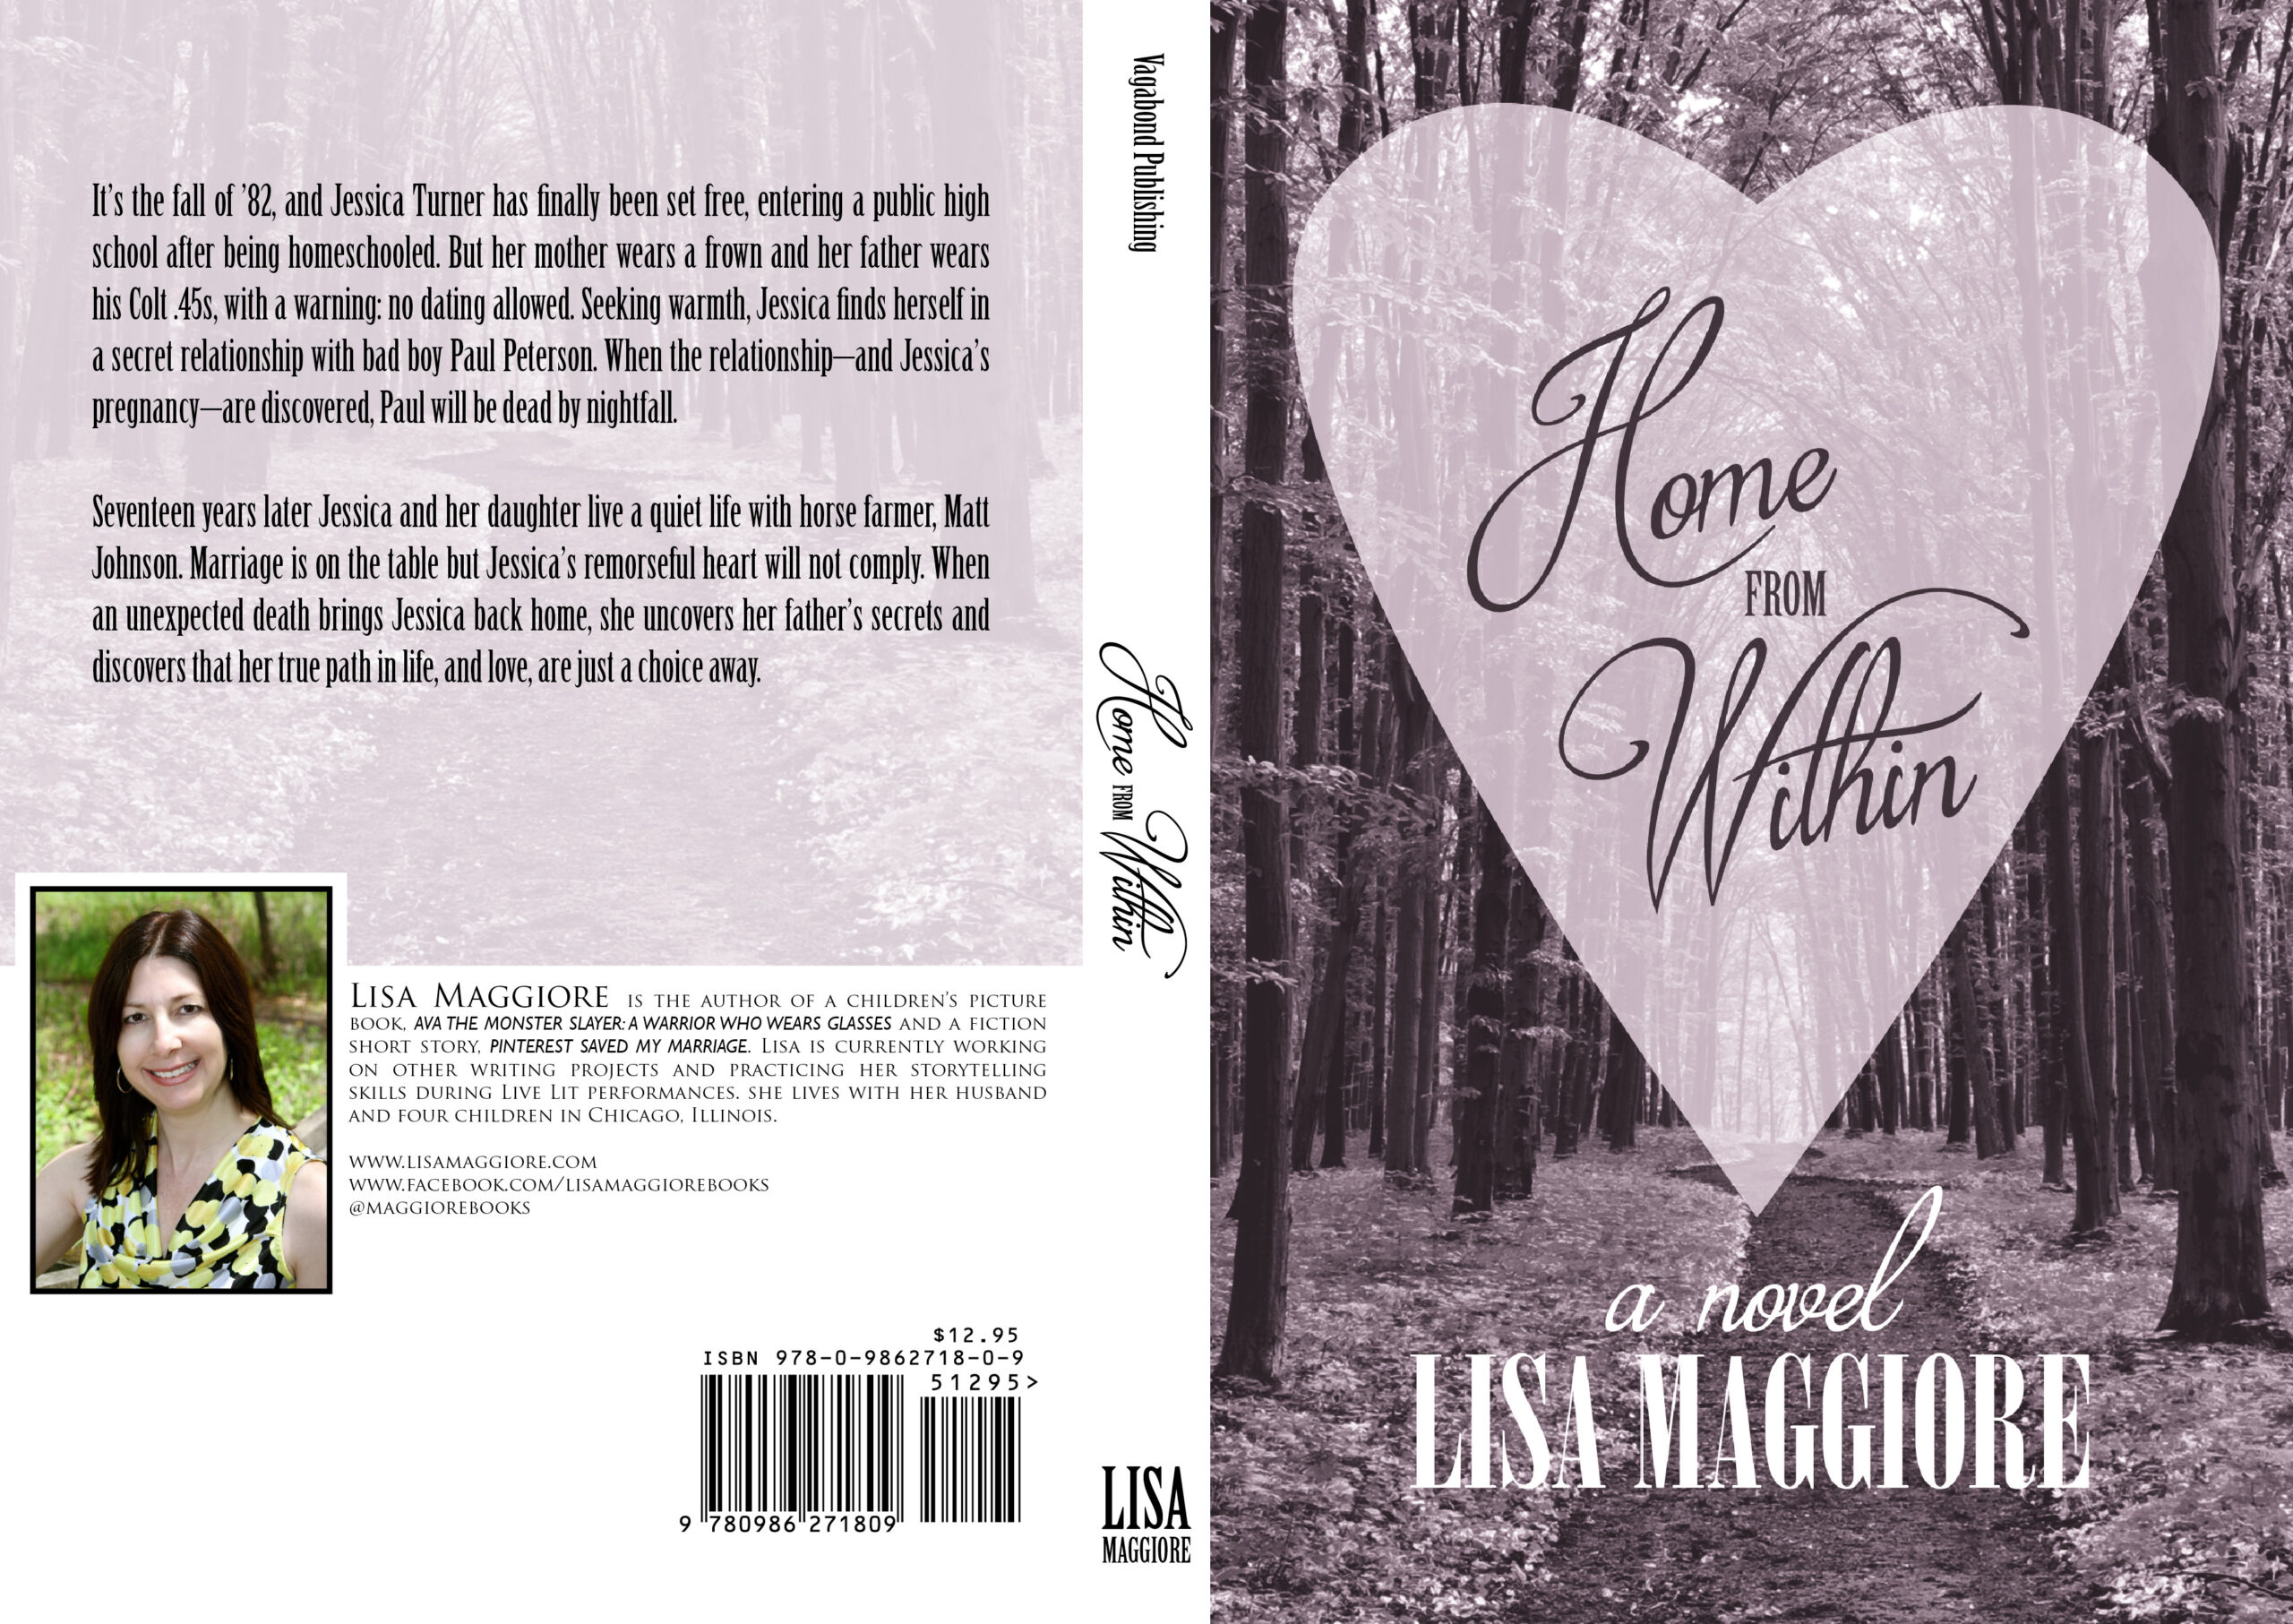 FREE: Home from Within by Lisa Maggiore